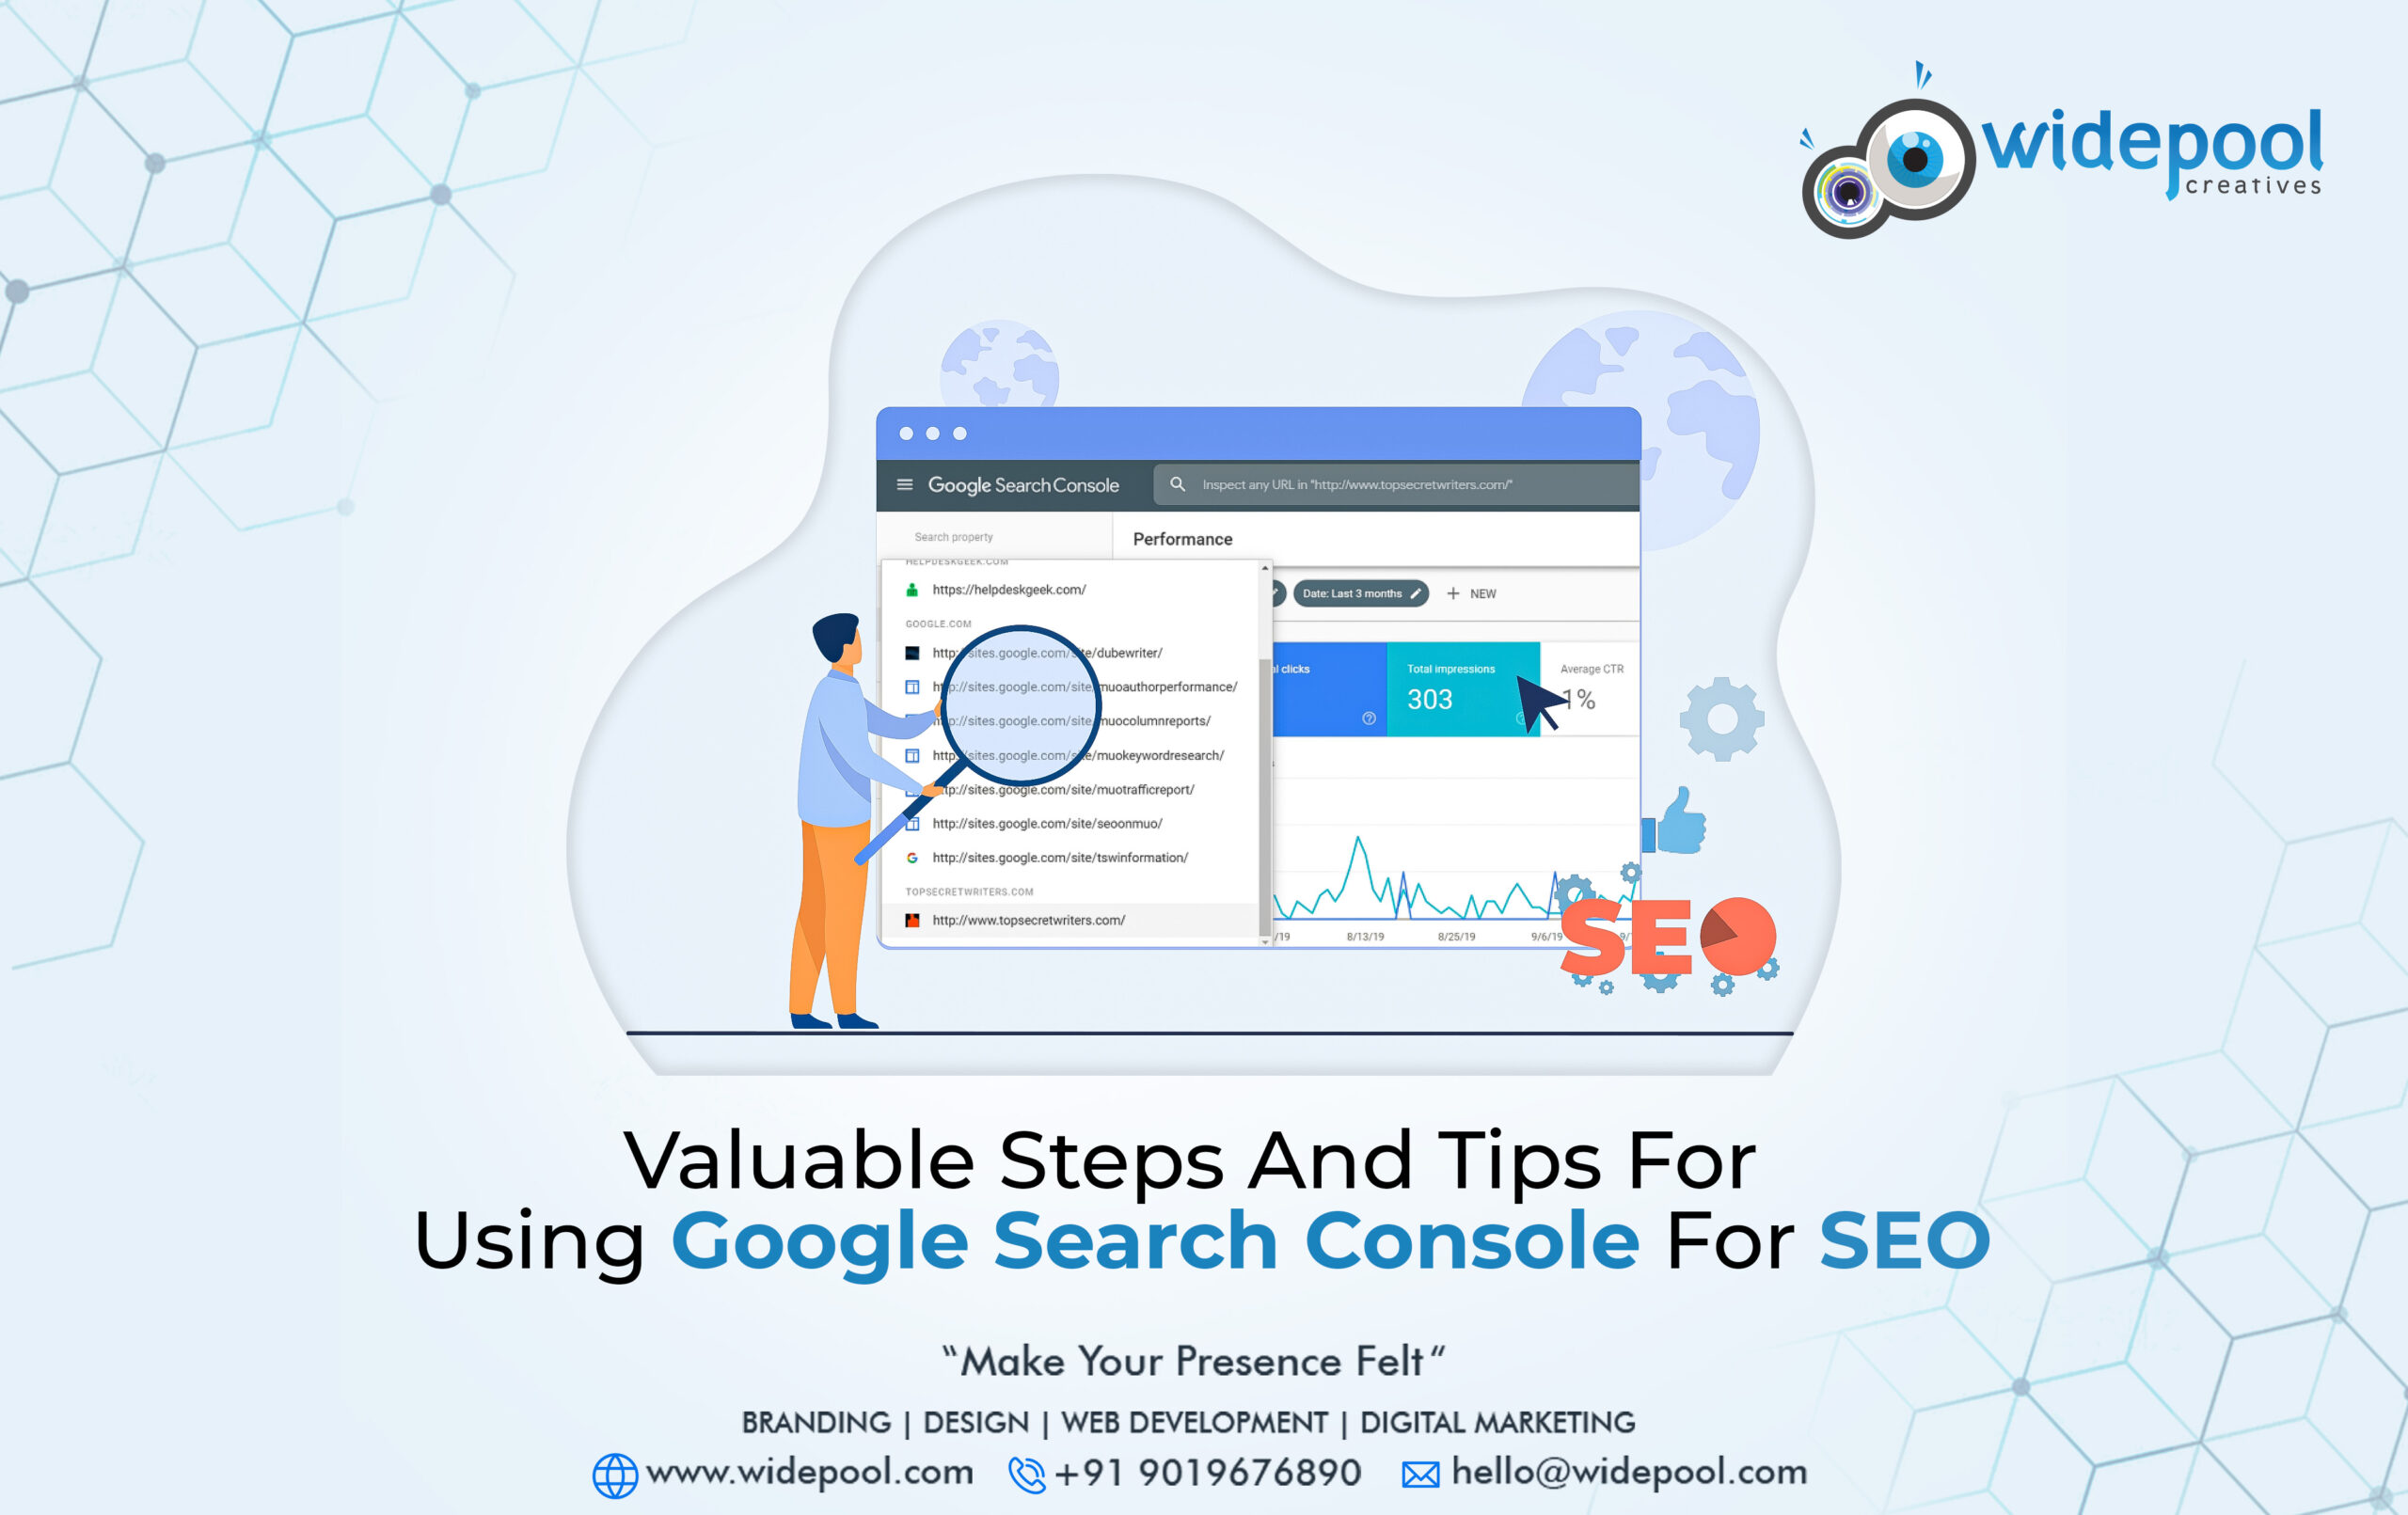 Valuable Steps and Tips for Using Google Search Console for SEO